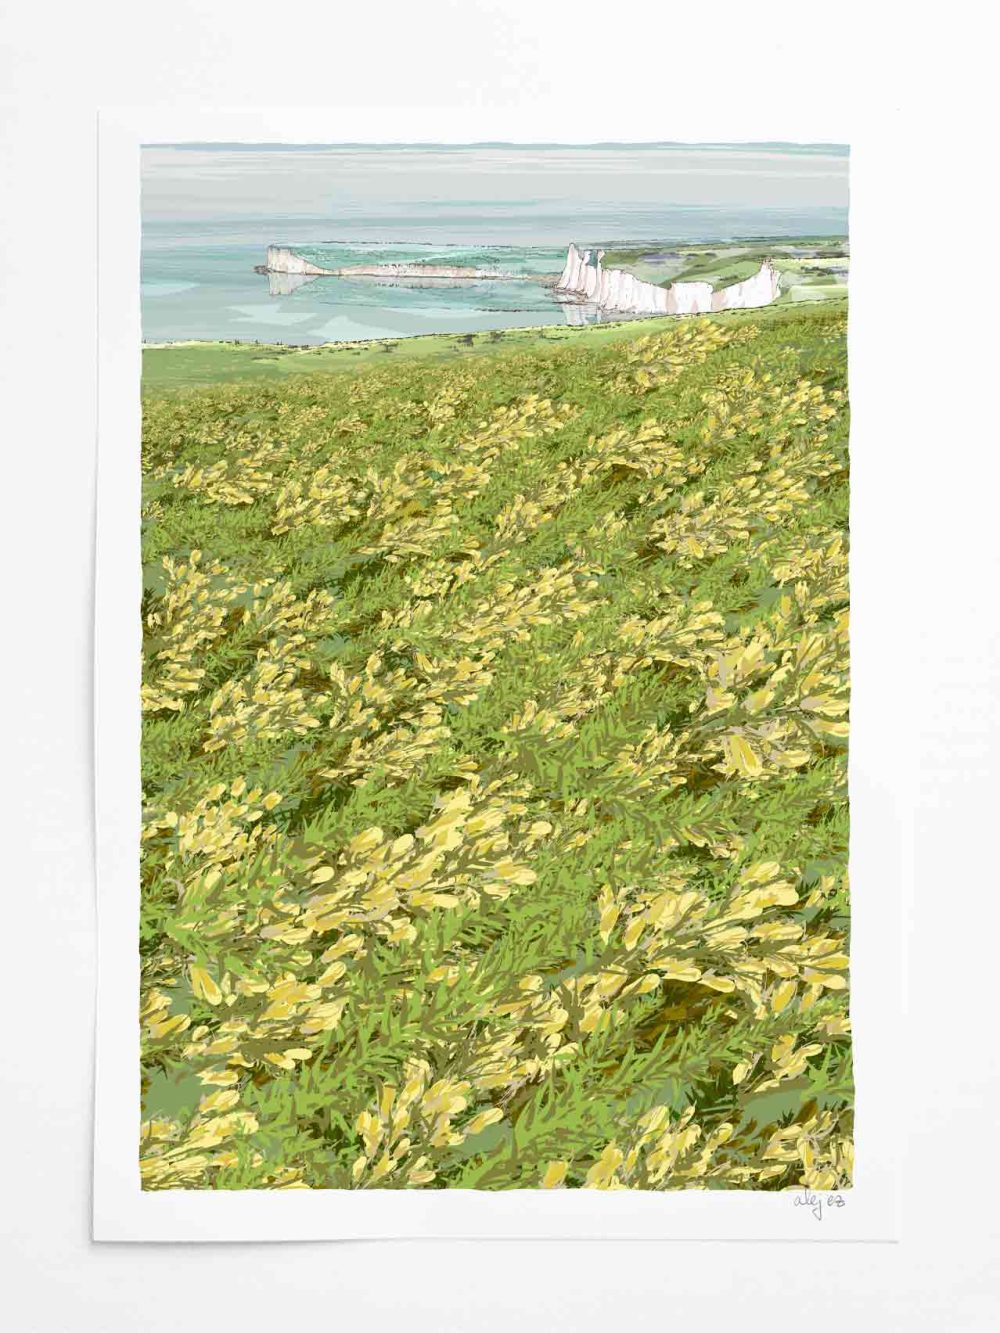 Art print by artist alej ez titled Cuckmere Cottages West View Gorse in Bloom